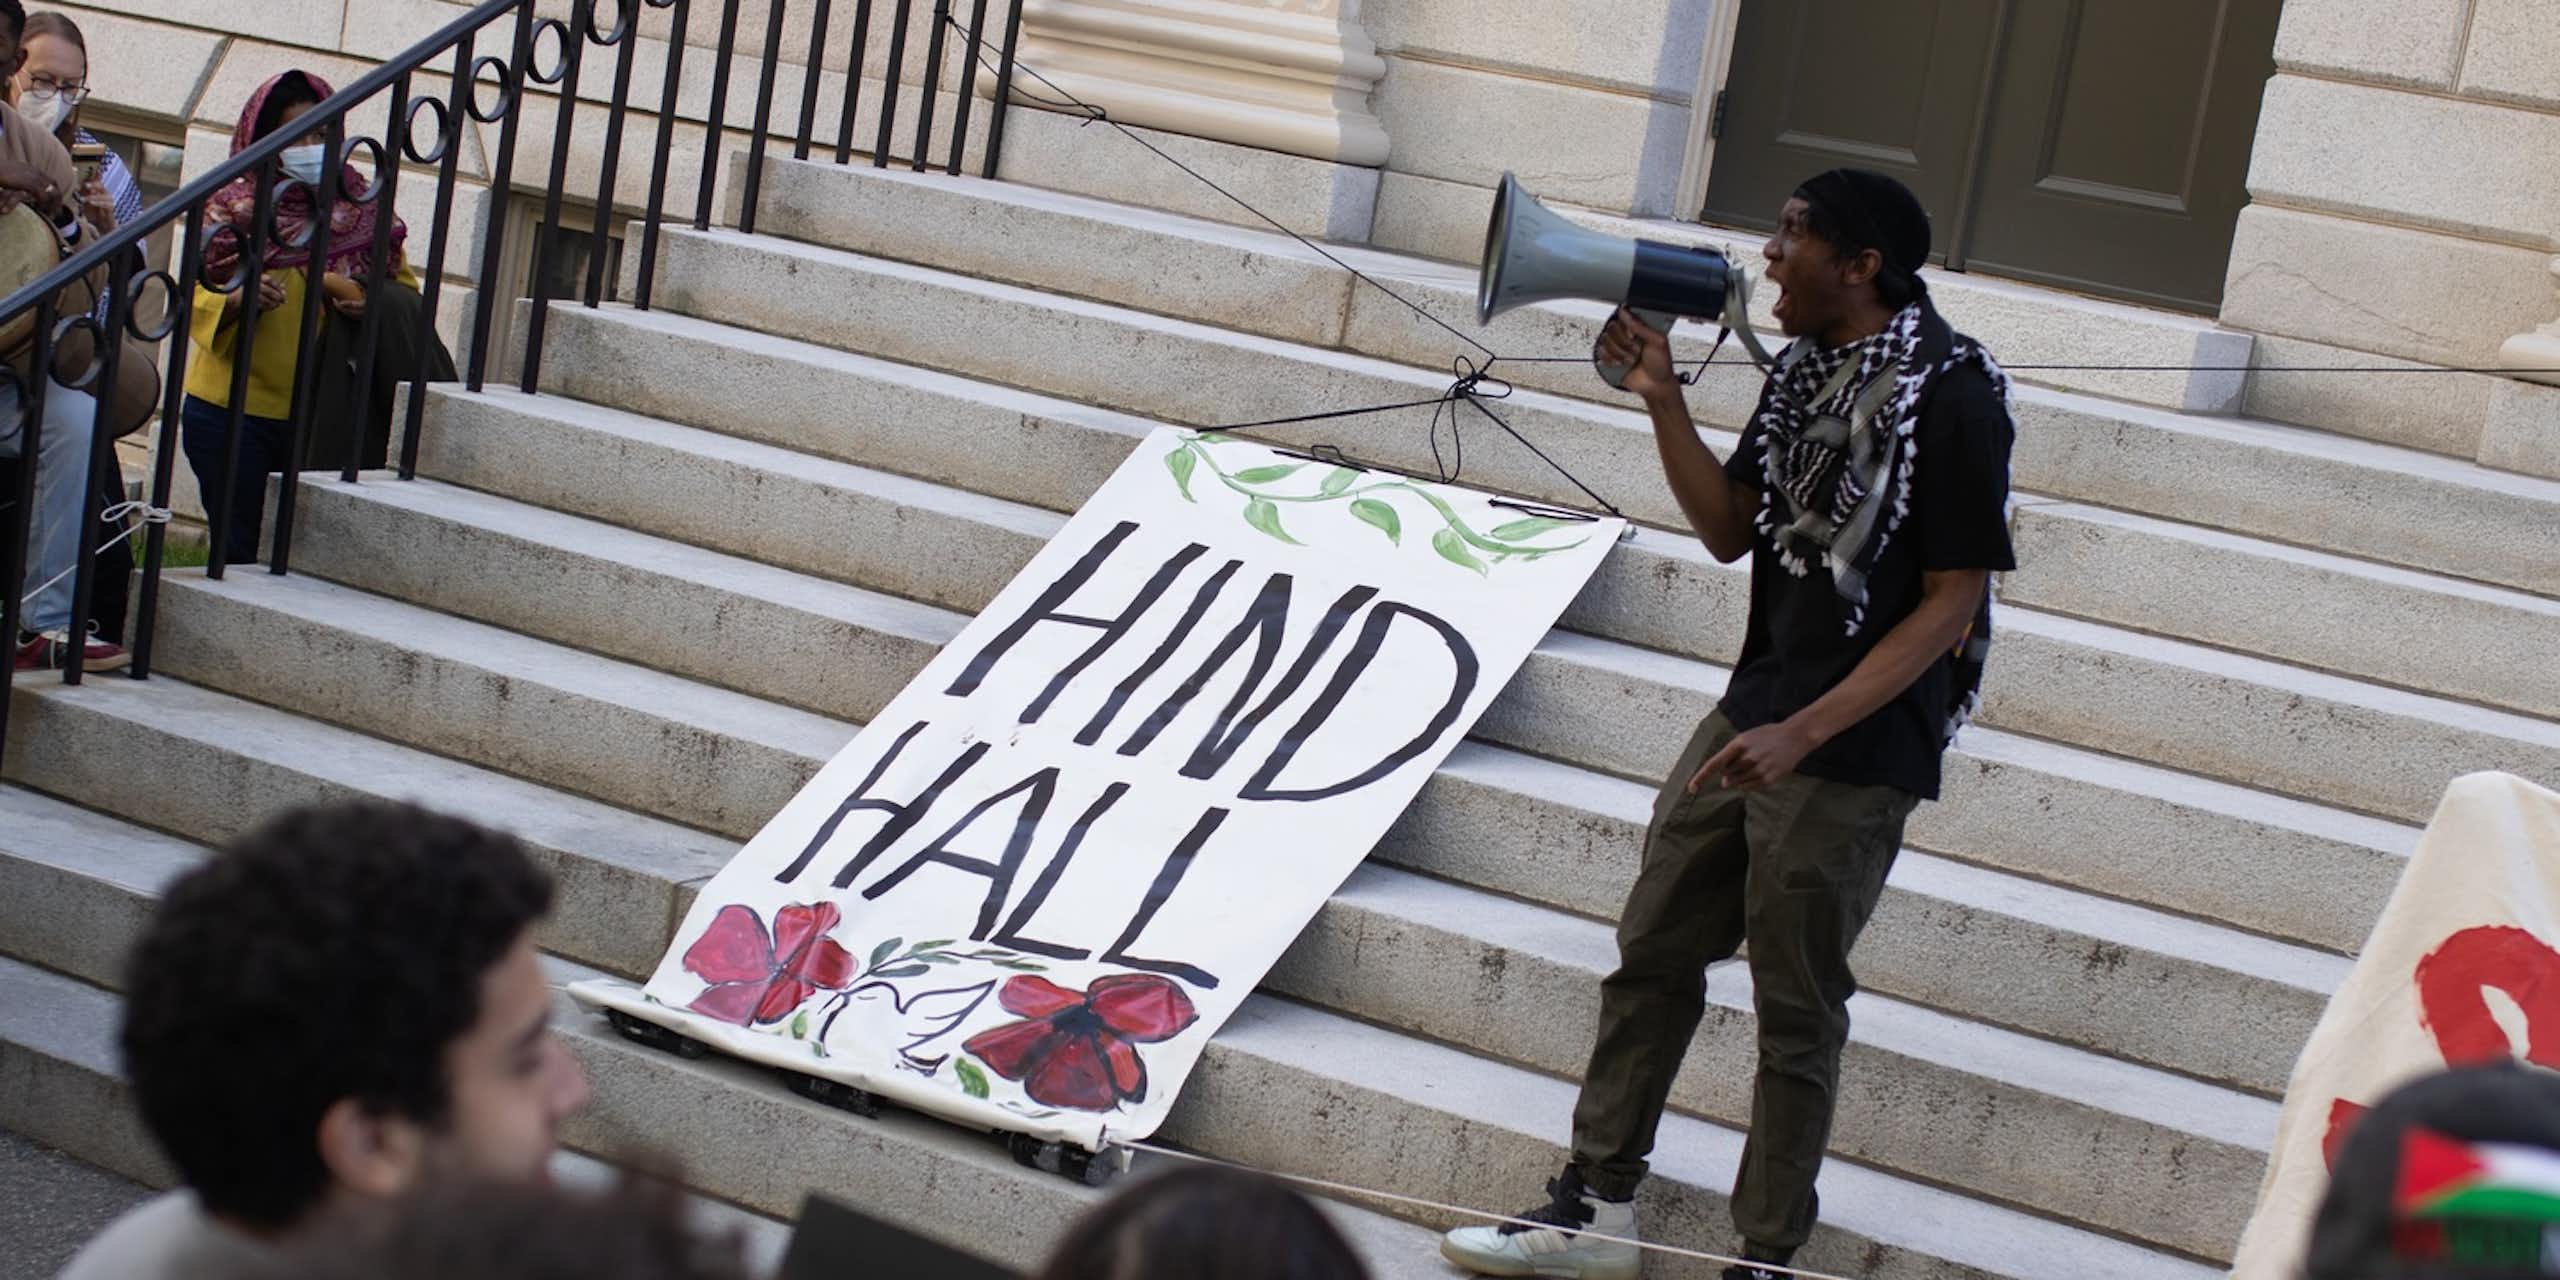 A person seen with a megaphone and a banner that says 'Hind Hall.'